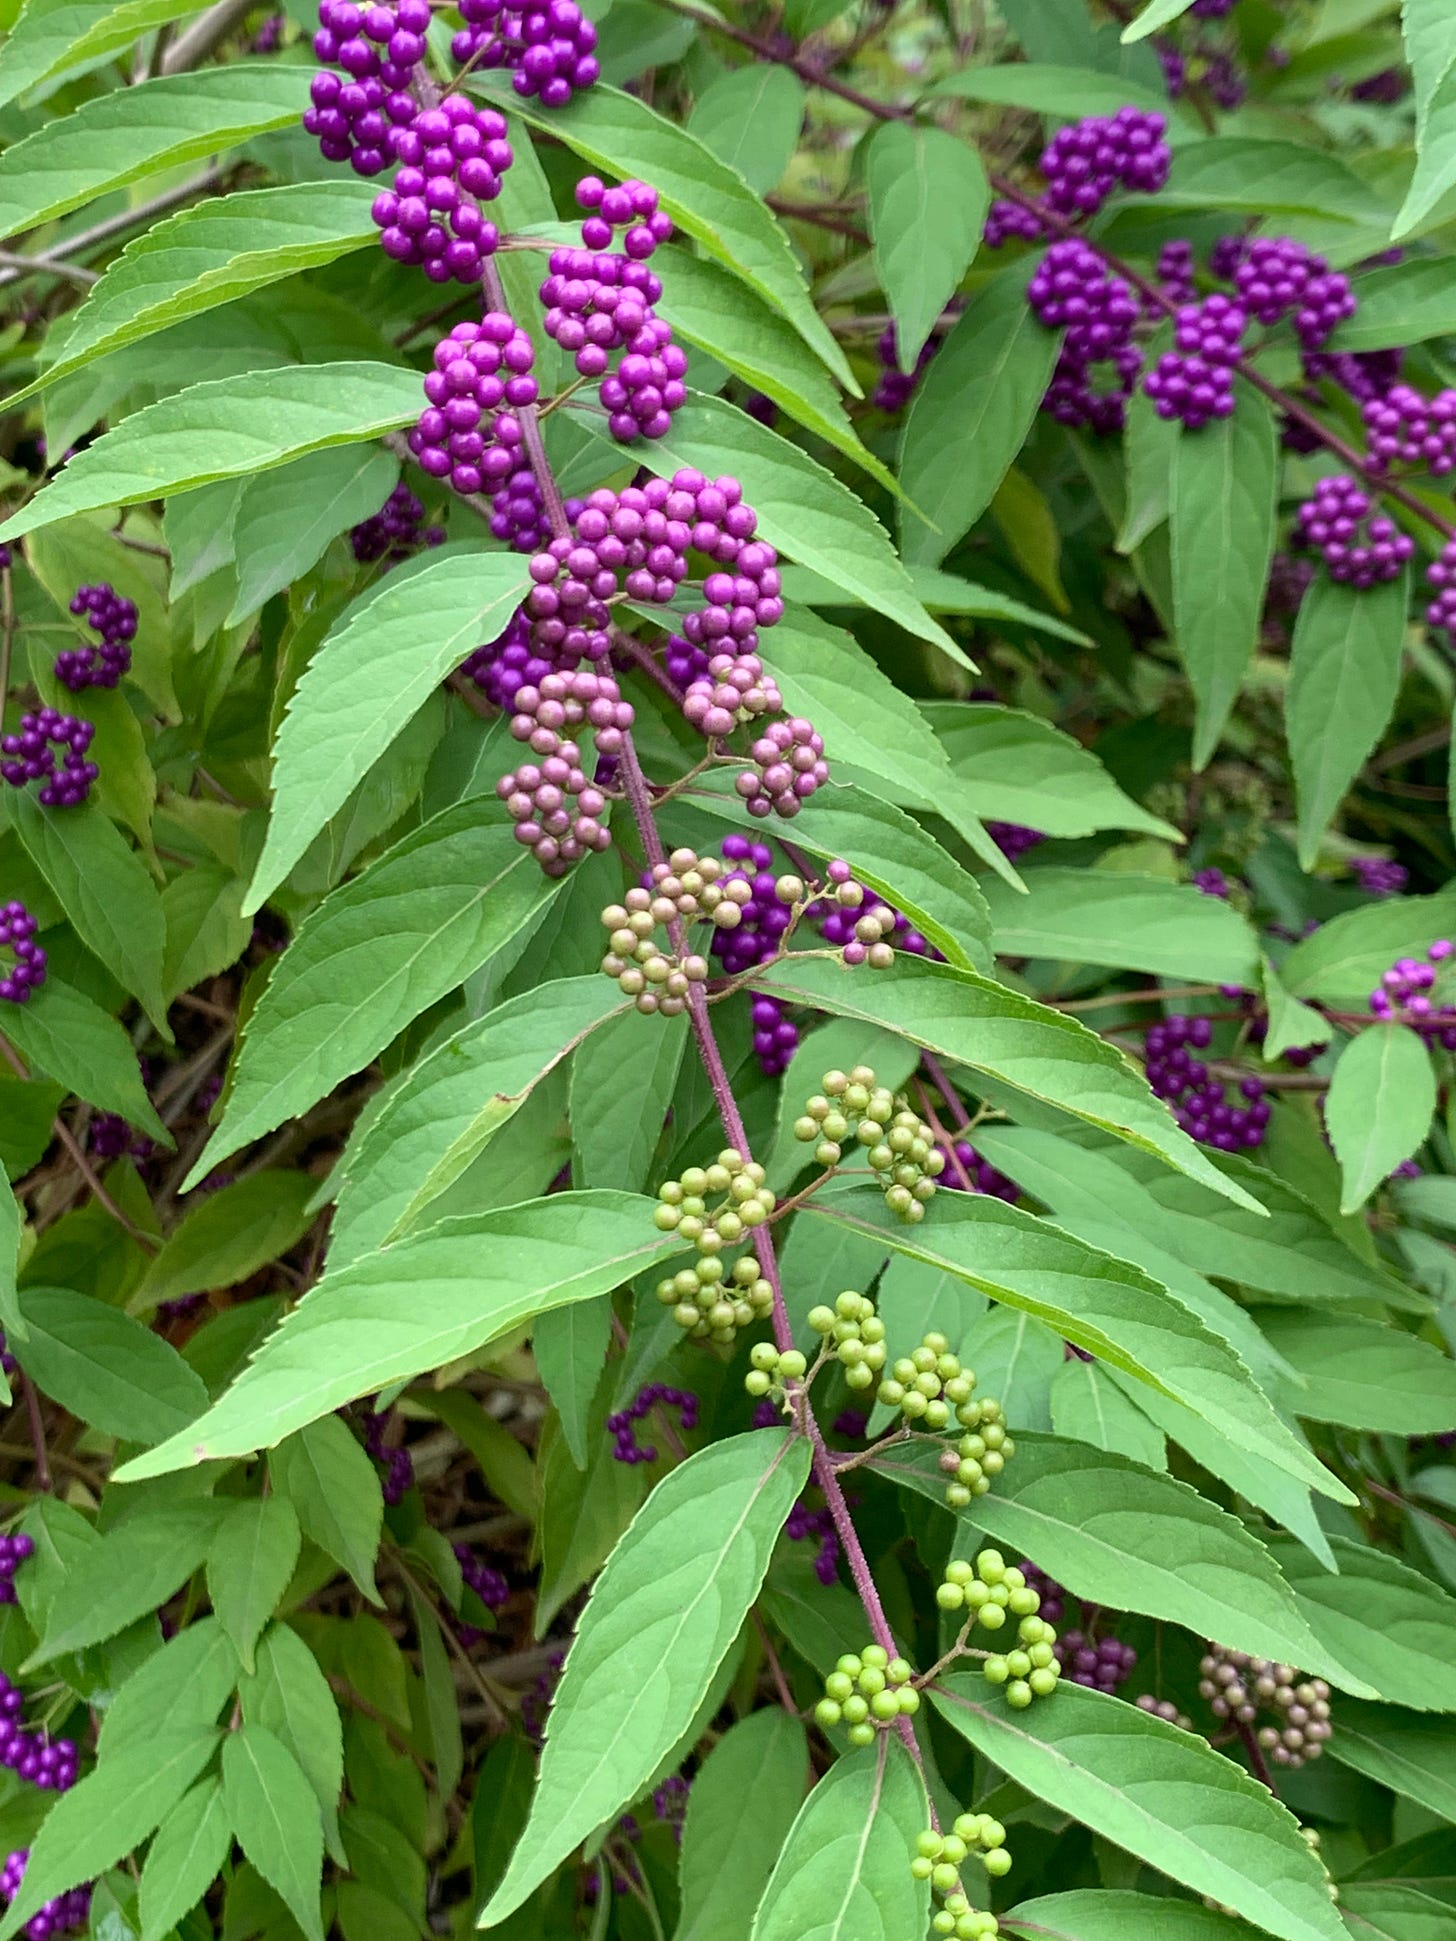 Very round and small clusters of berries shifting from bright purple to lilac to cream to green as they move down the branch of long green leaves.